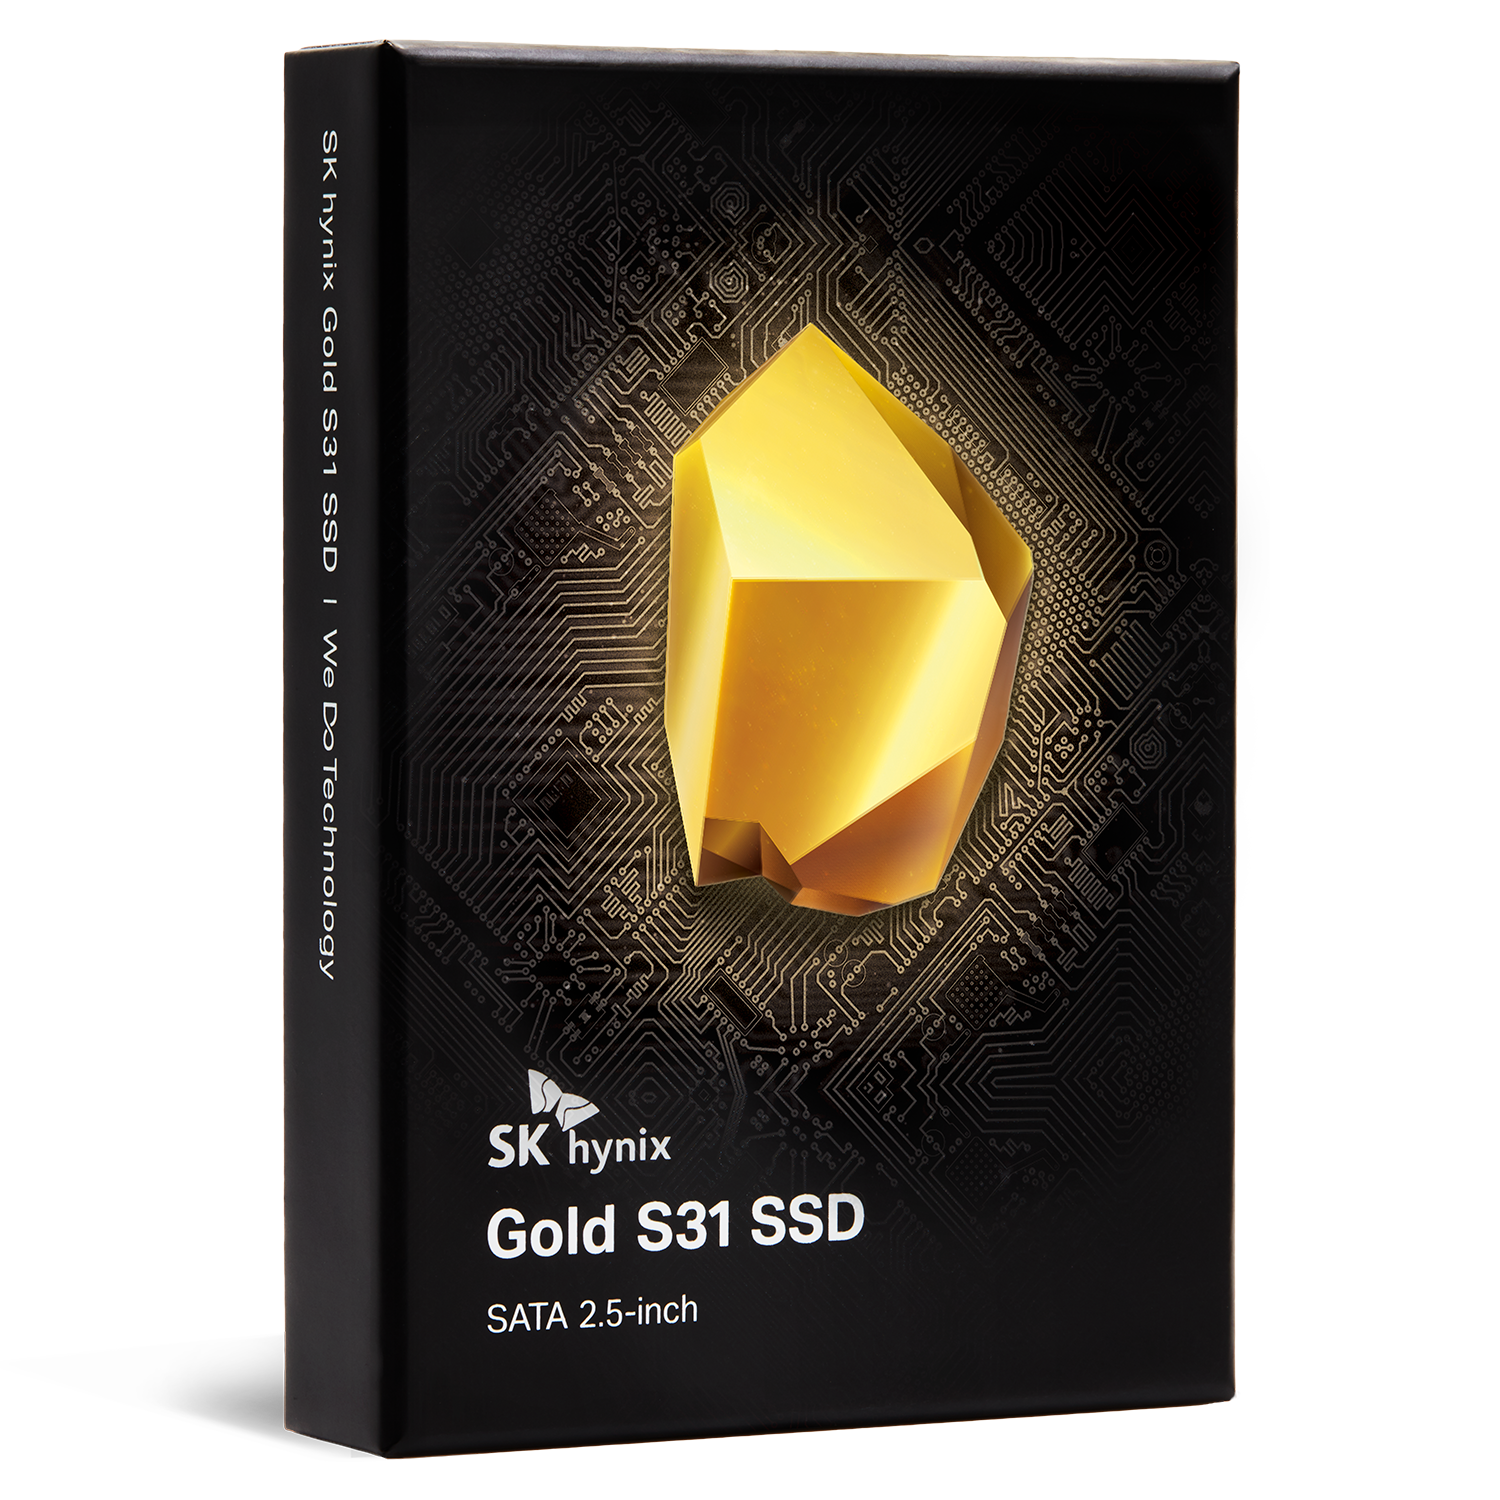 Media asset in full size related to 3dfxzone.it news item entitled as follows: SK Hynix esordisce nel mercato consumer con gli SSD Gold S31 SATA III | Image Name: news29885_SK-Hynix-Gold-S31_2.png